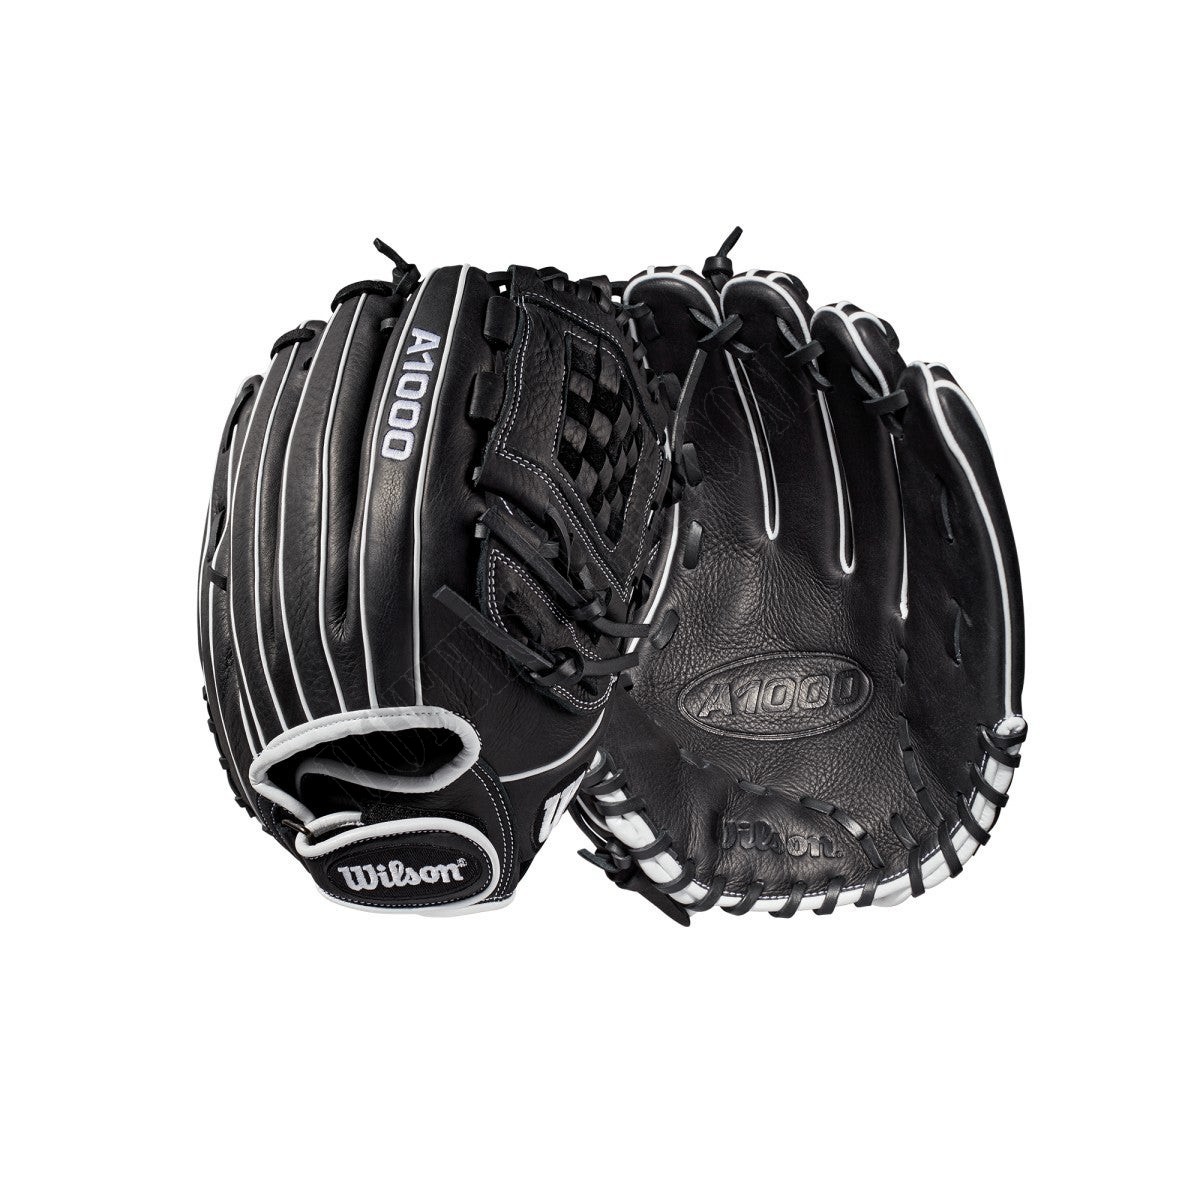 2019 A1000 12" Pitcher's Fastpitch Glove ● Wilson Promotions - 2019 A1000 12" Pitcher's Fastpitch Glove ● Wilson Promotions